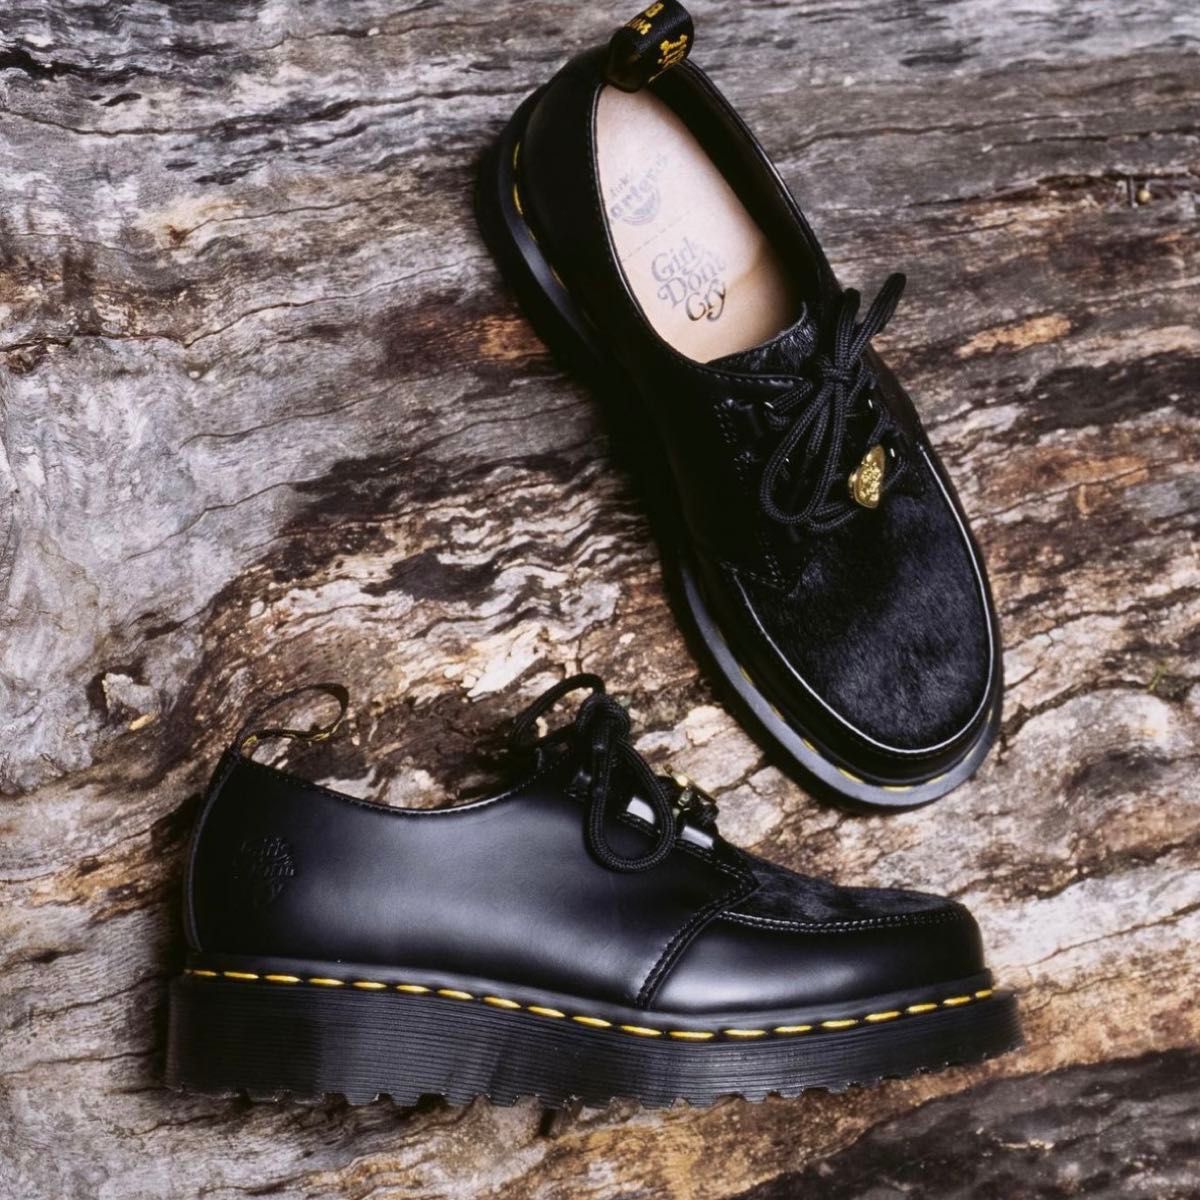 Girls Don’t Cry × Dr.Martens Ramsey Creeper Black